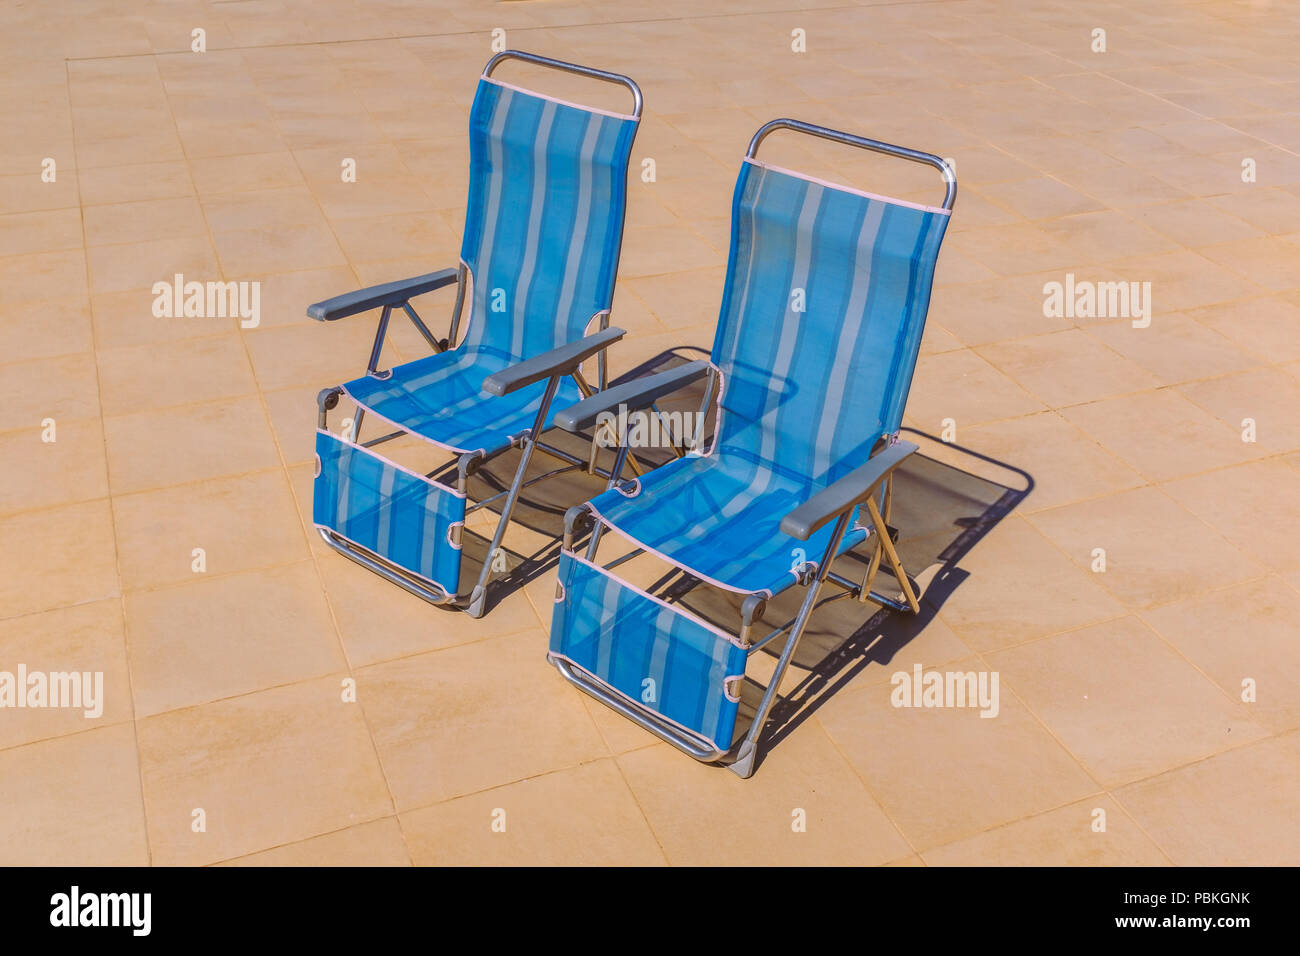 Two blue nylon stripe foldable  recliner deck chairs in an upright position with no body sitting on them. They are on a stone patio in bright sunshine Stock Photo